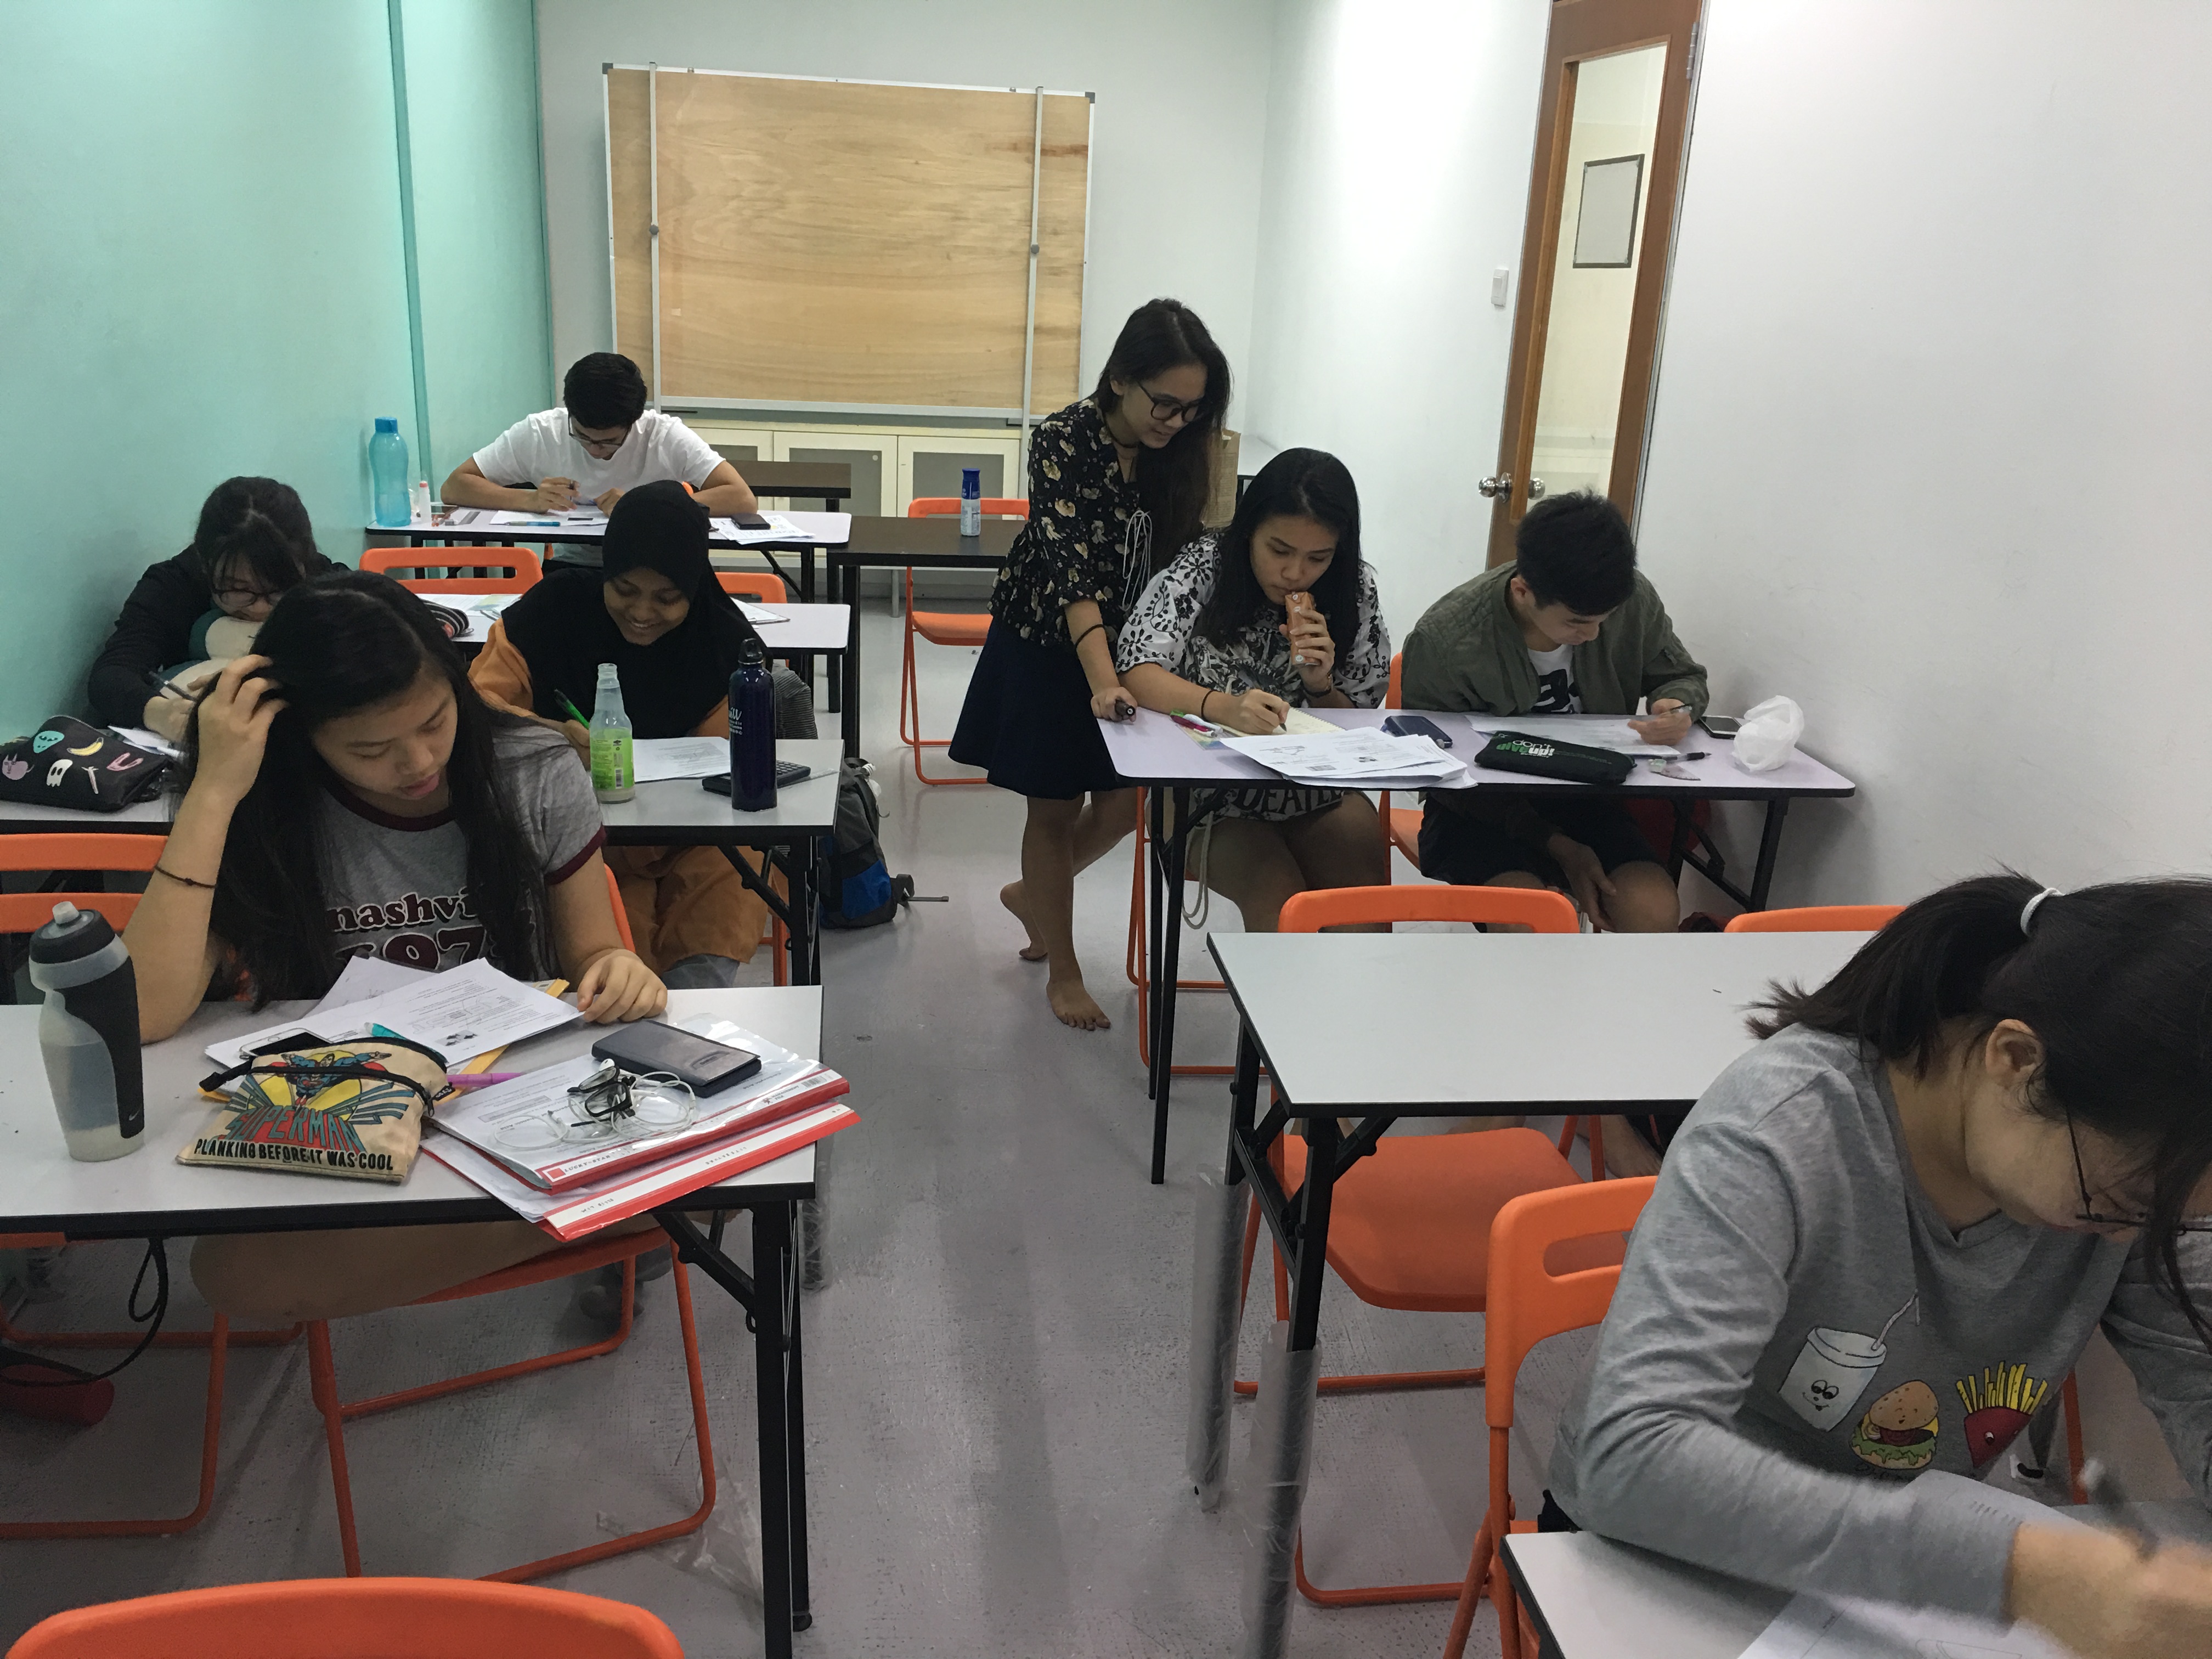 igcse online tuition,igcse,online tuition,vbest,igcse tuition near me IGCSE Online Tuition VBest Year 1 to Year 13 Tuition Centre